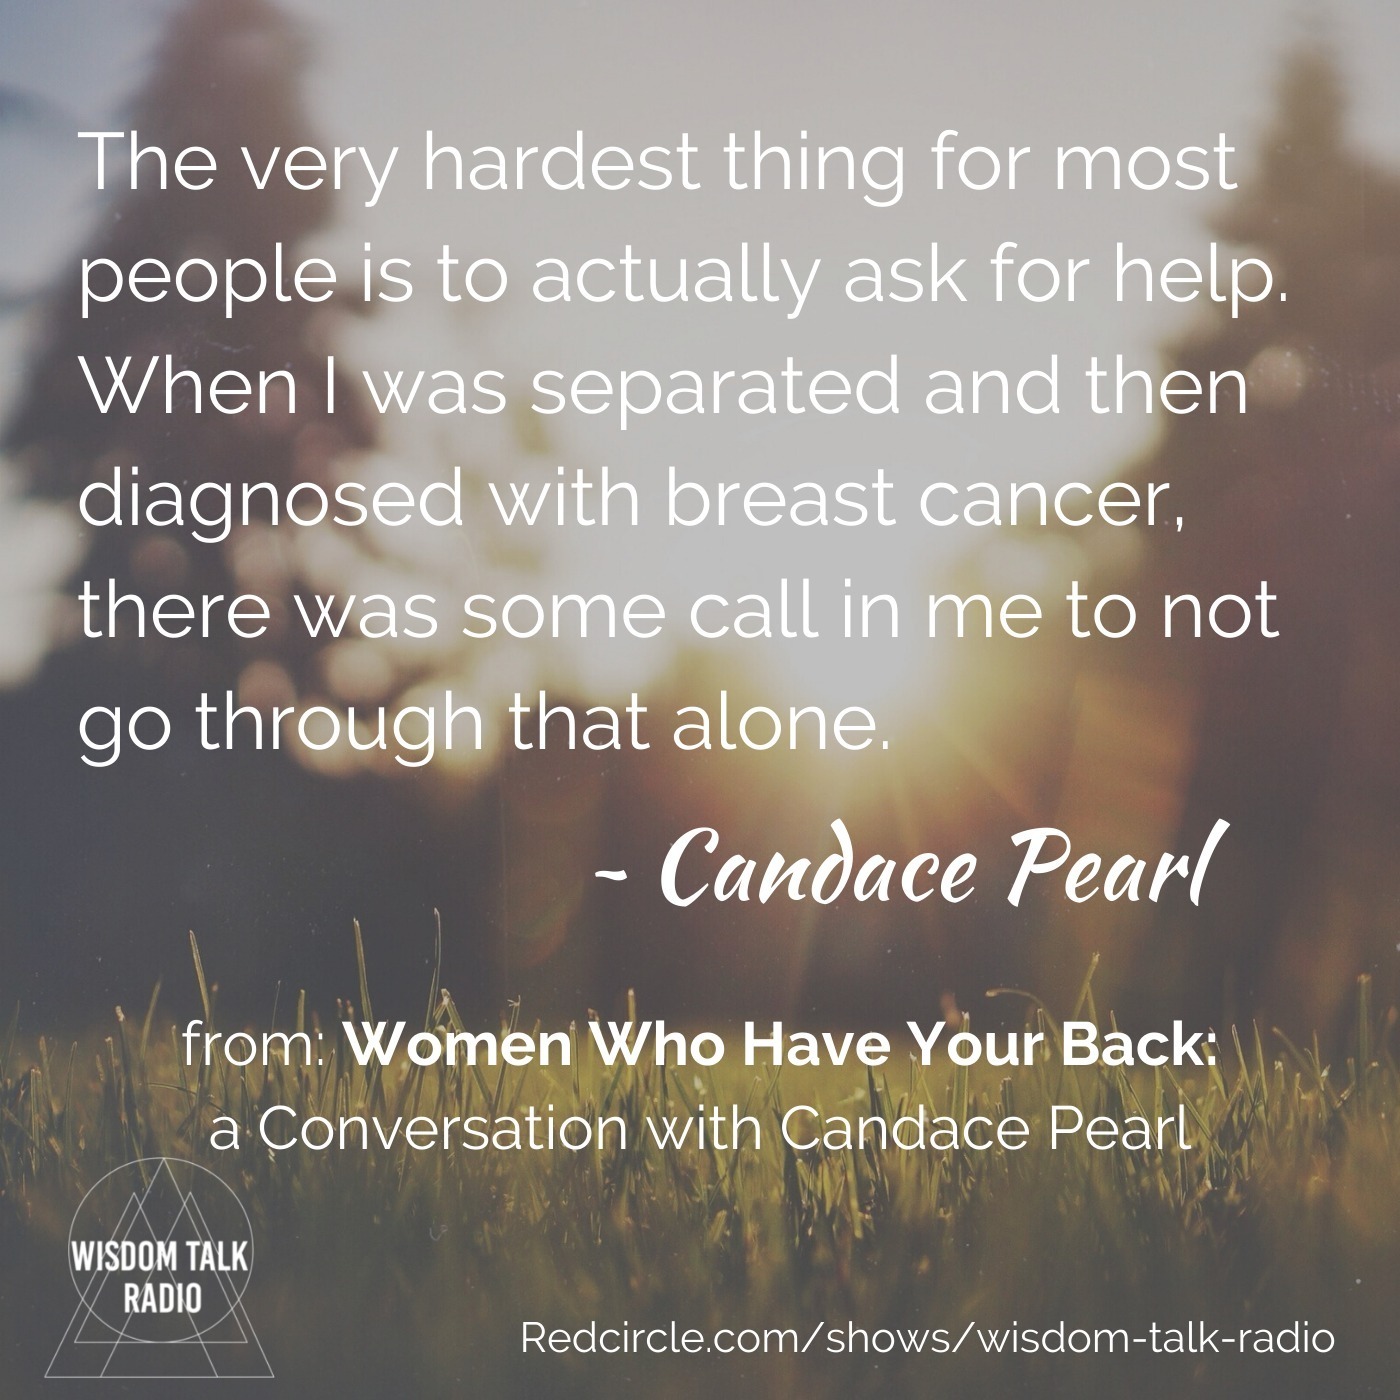 Women Who Have Your Back, a conversation with Candace Pearl